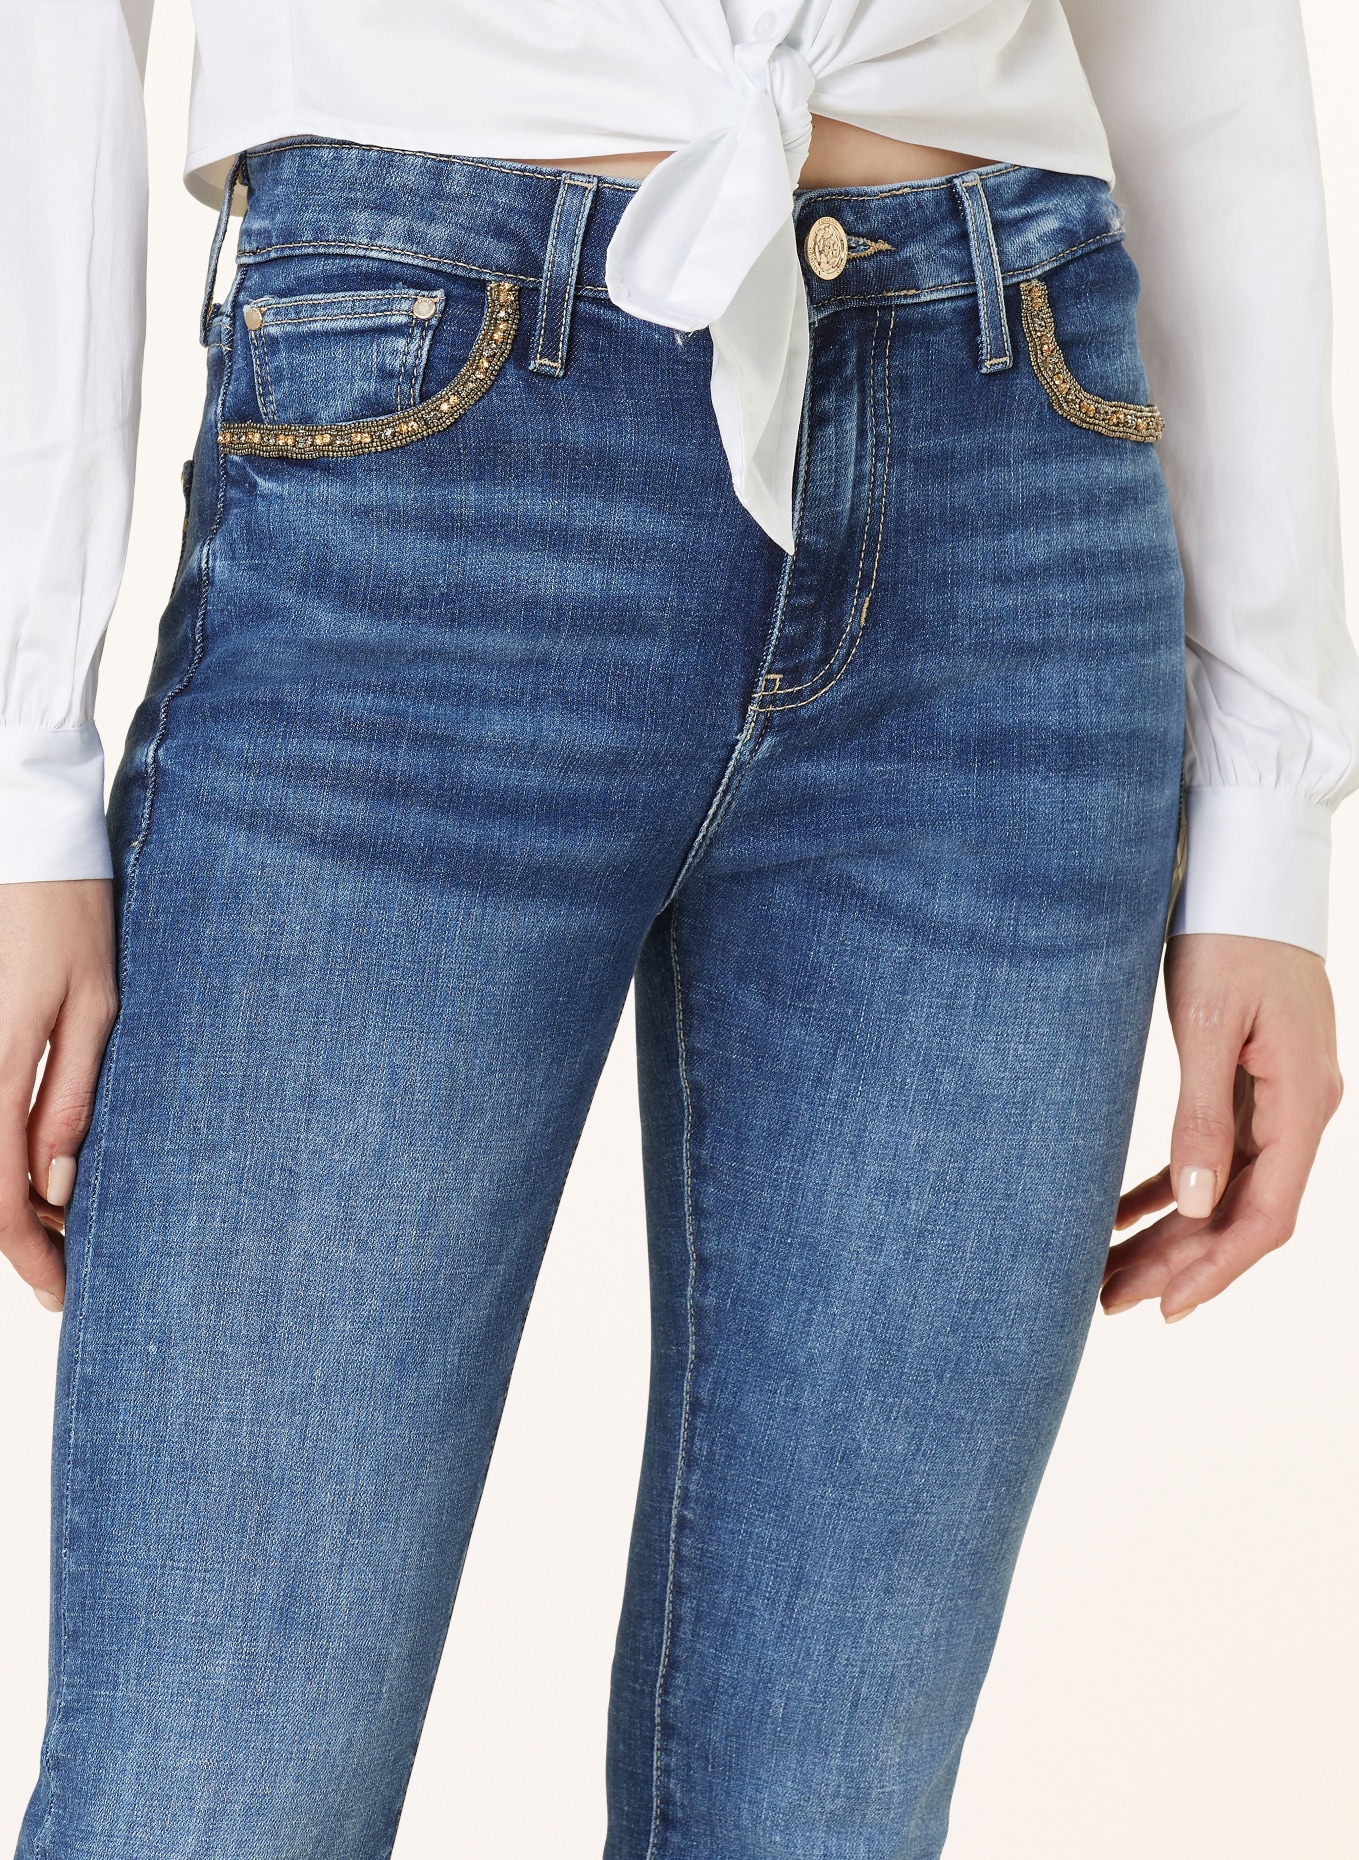 GUESS Flared jeans SEXY FLARES, Color: ETSH ETOSHA (Image 5)